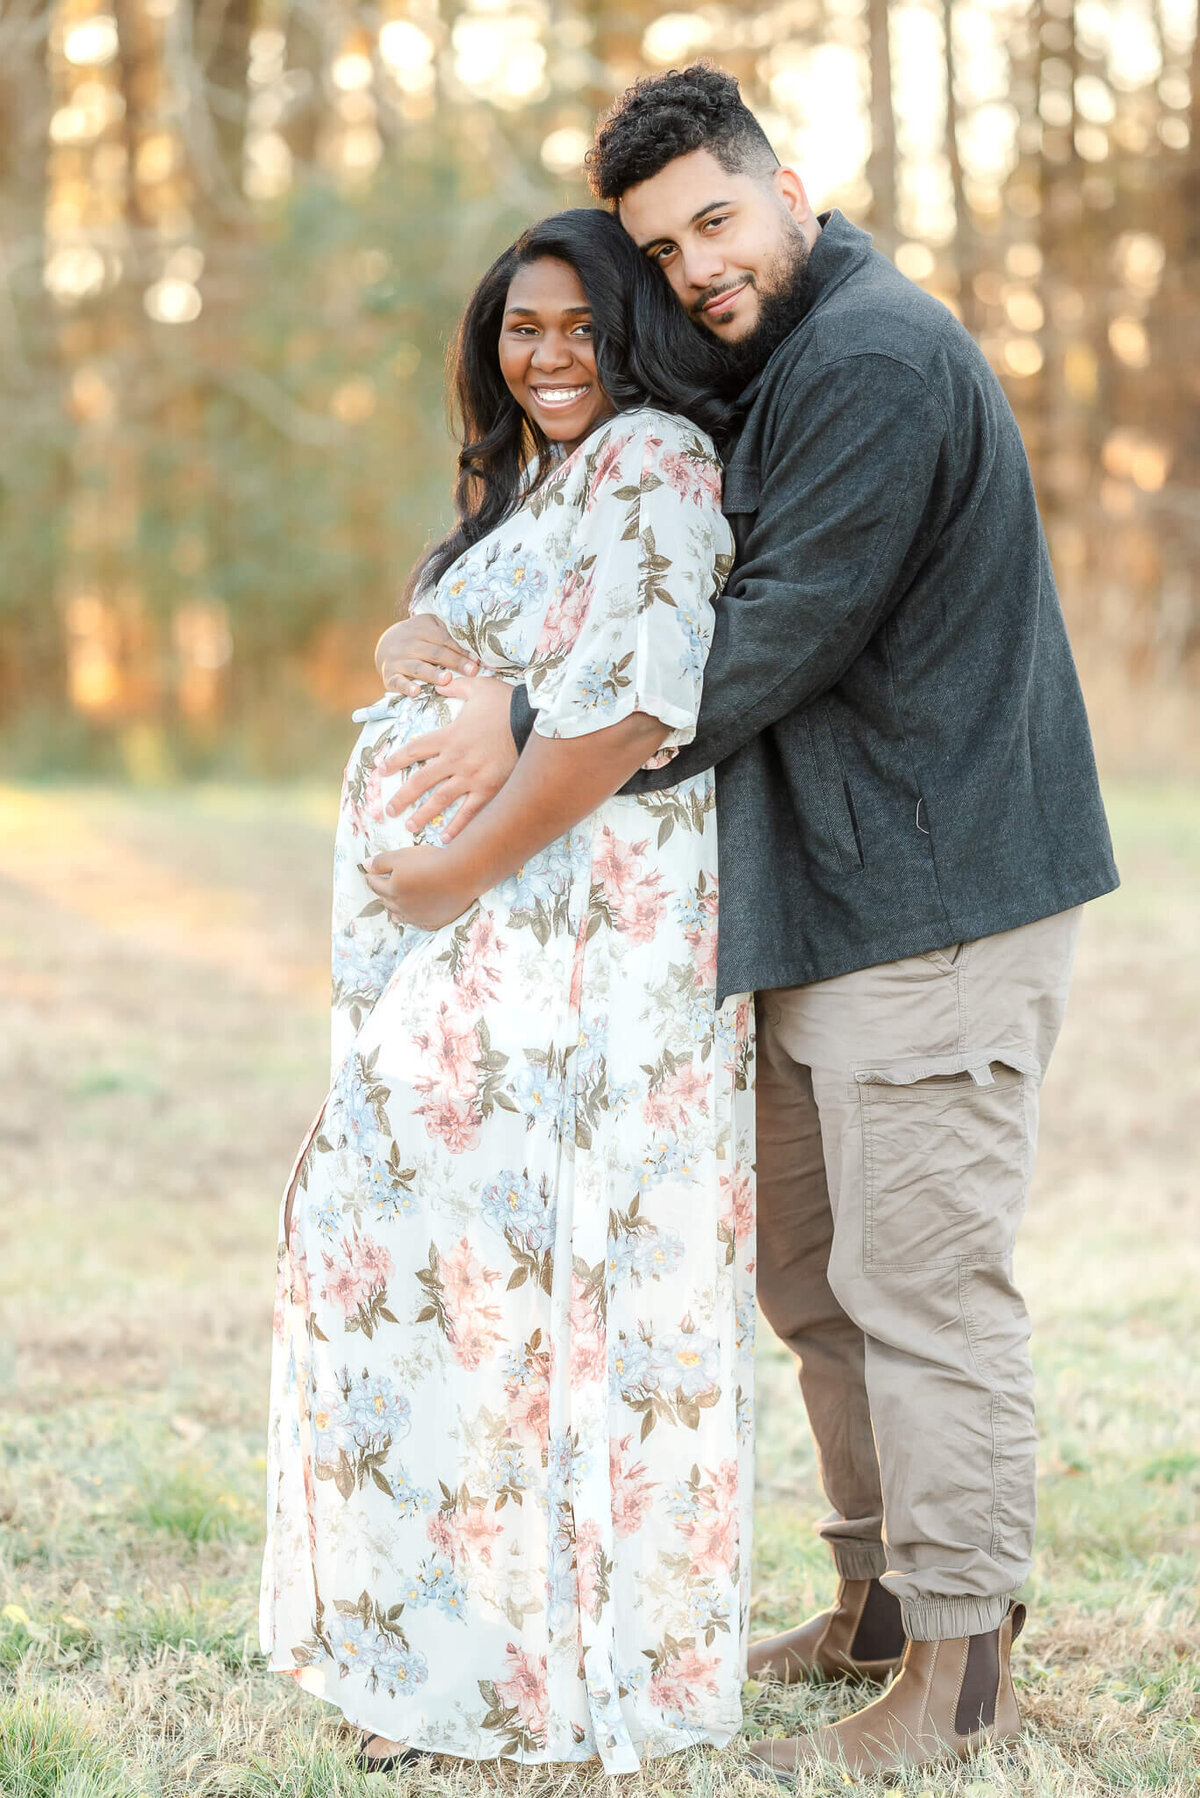 A pregnant couple snuggles close, with dad behind mom. Mom shines in a white floral dress during her Chesapeake maternity photography session.